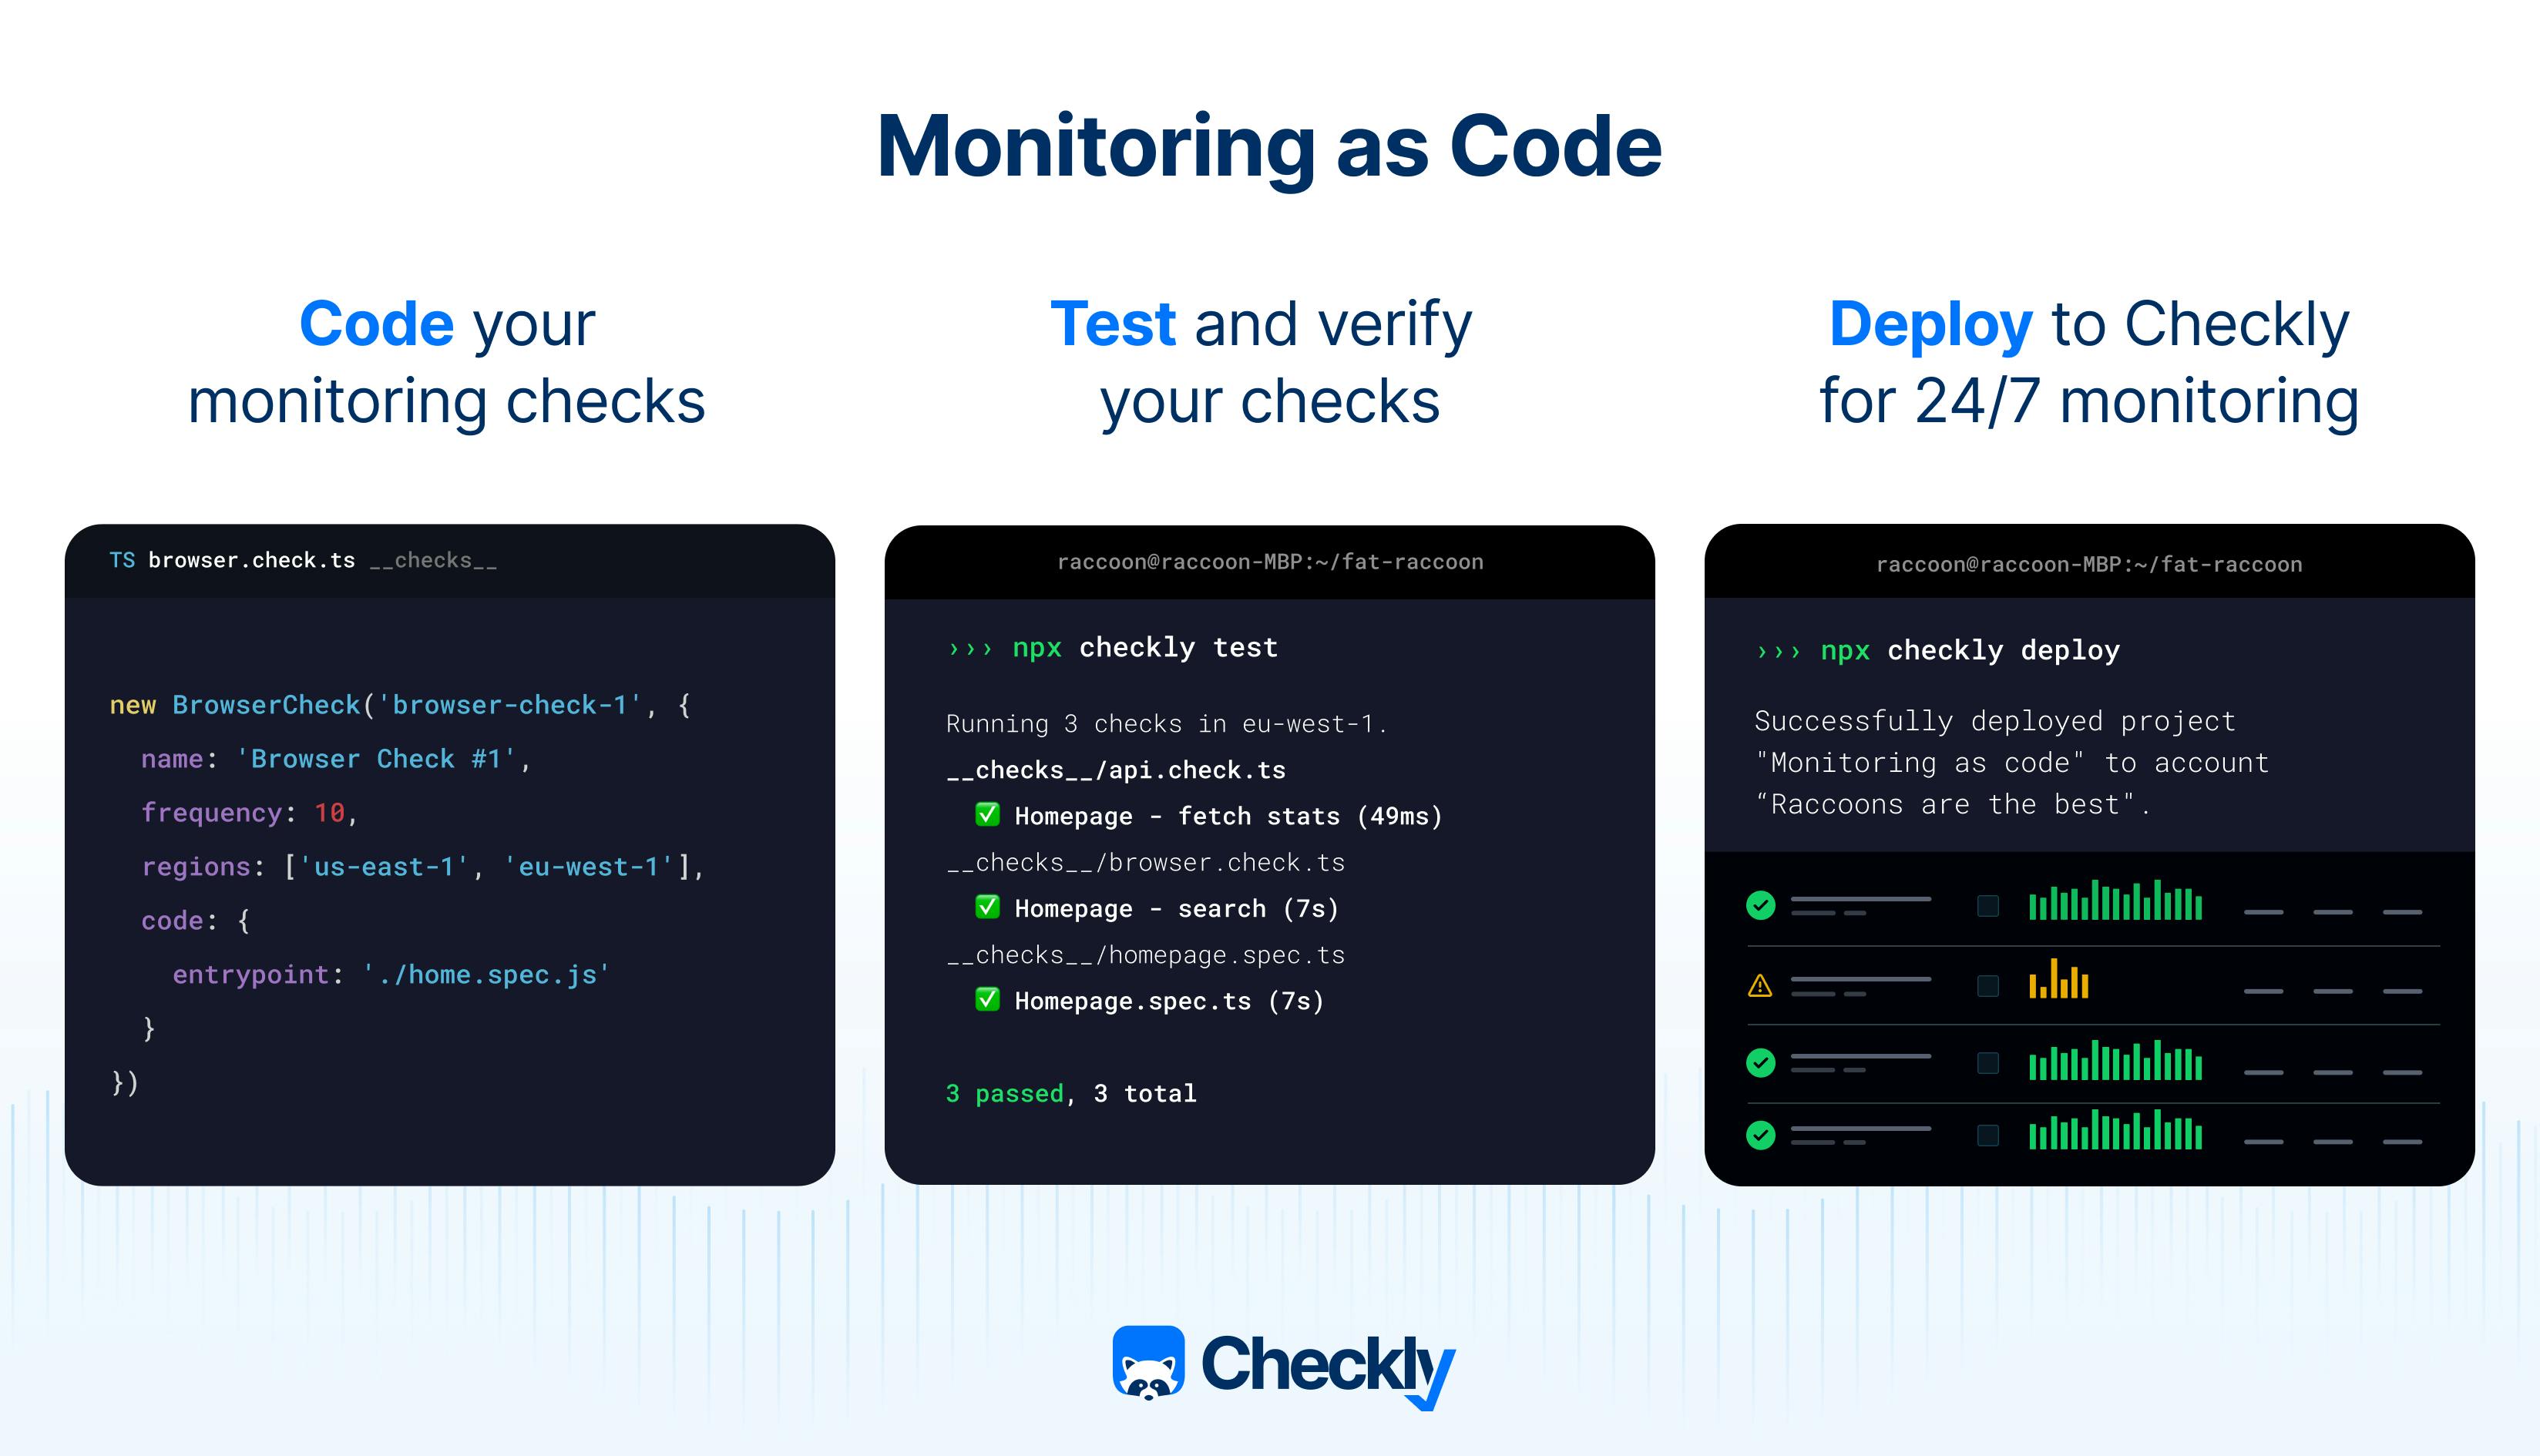 Graphic visualizing the Monitoring as Code principle: Code, Test and Deploy